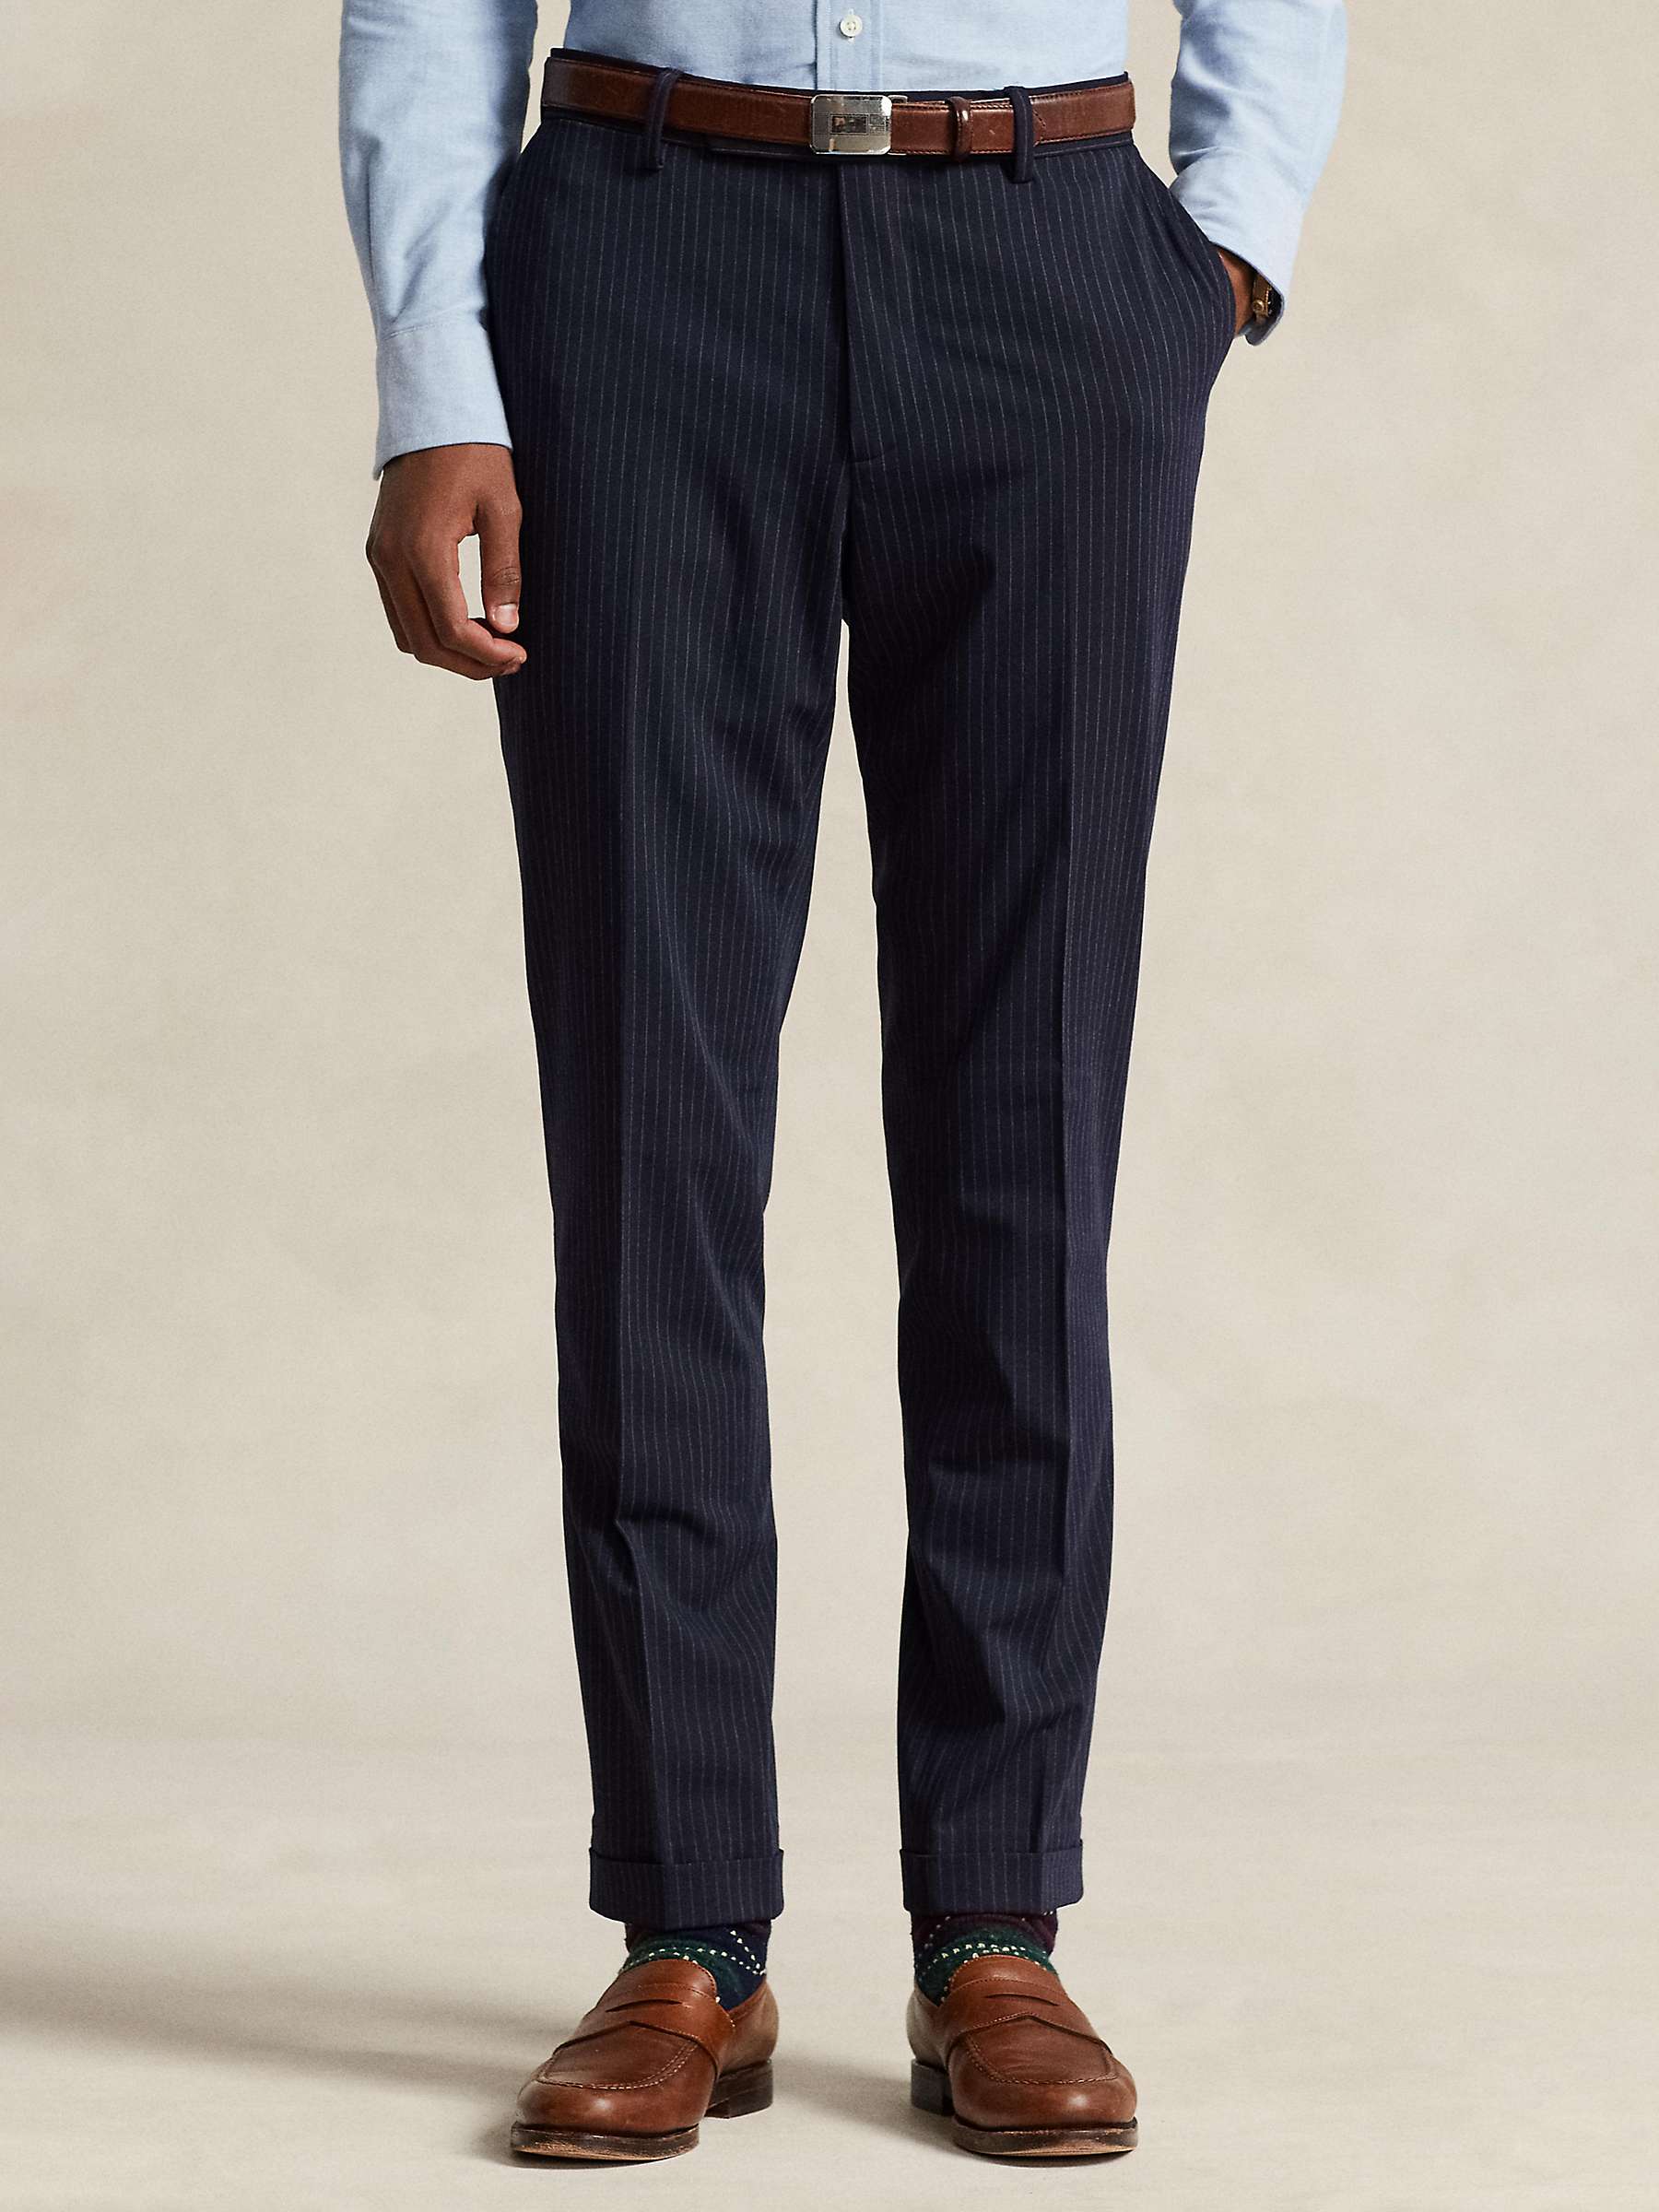 Buy Polo Ralph Lauren Performance Stretch Twill Trousers, Navy/Grey Online at johnlewis.com